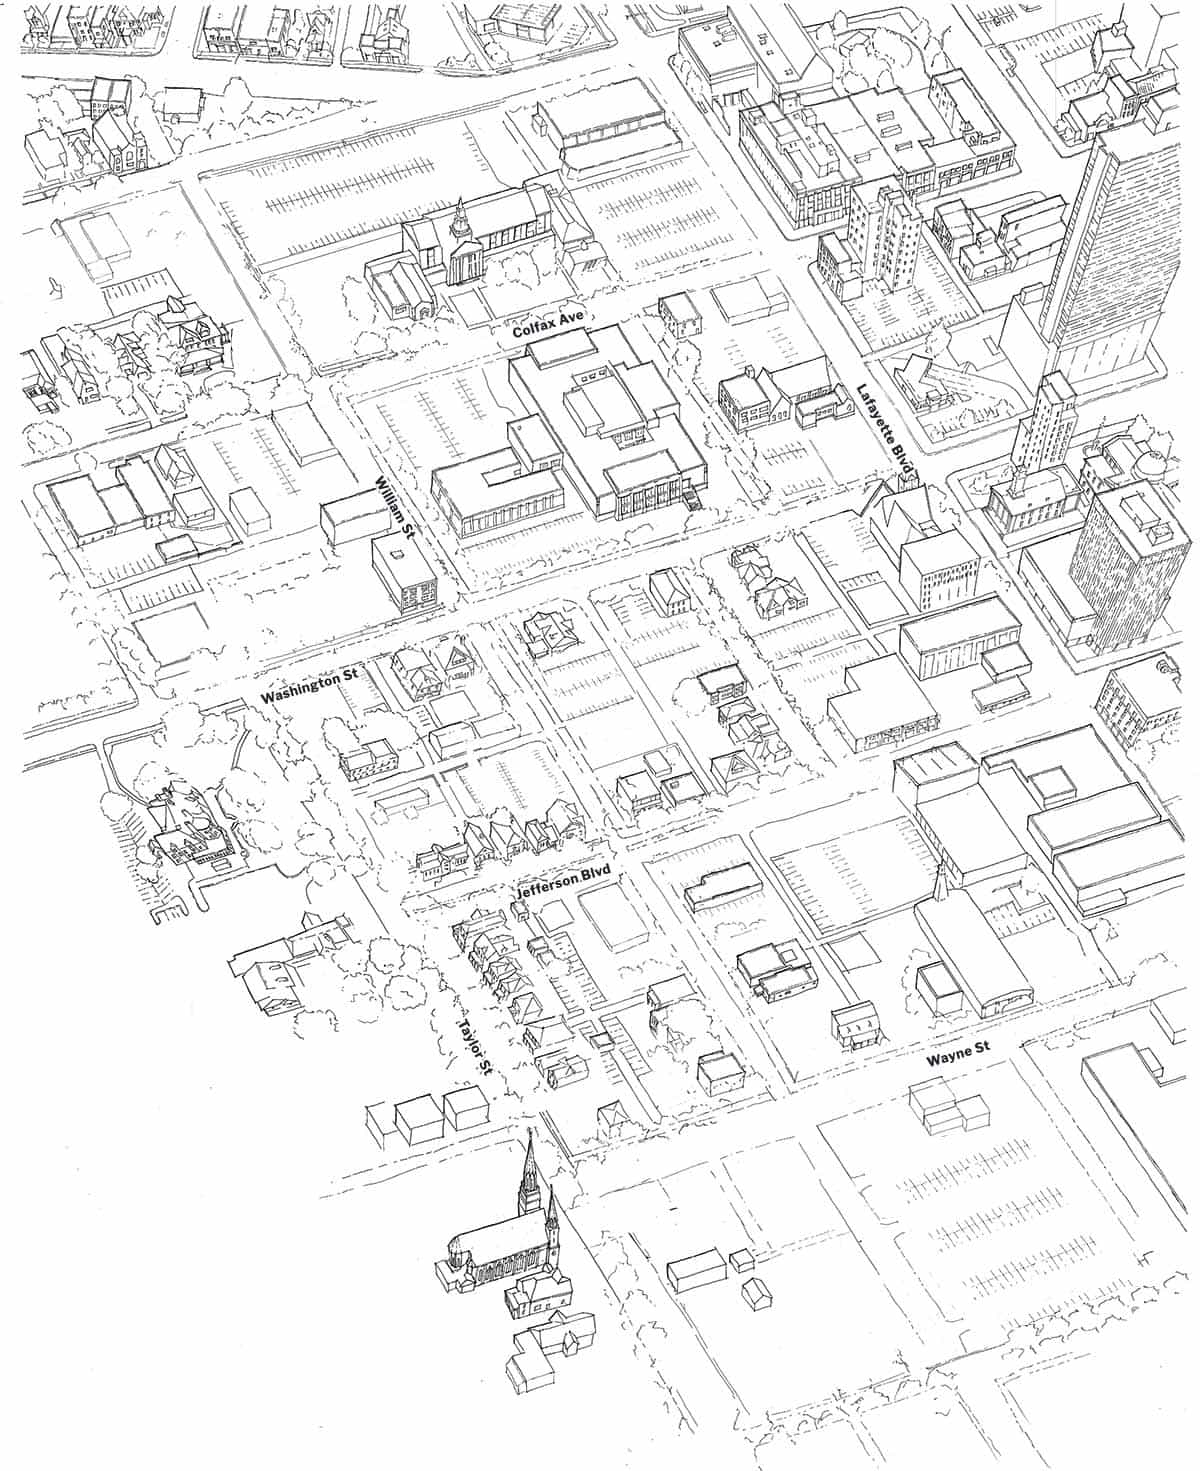 An aerial view drawing of downtown South Bend. There are several large, empty parking lots and bare, unused spaces.